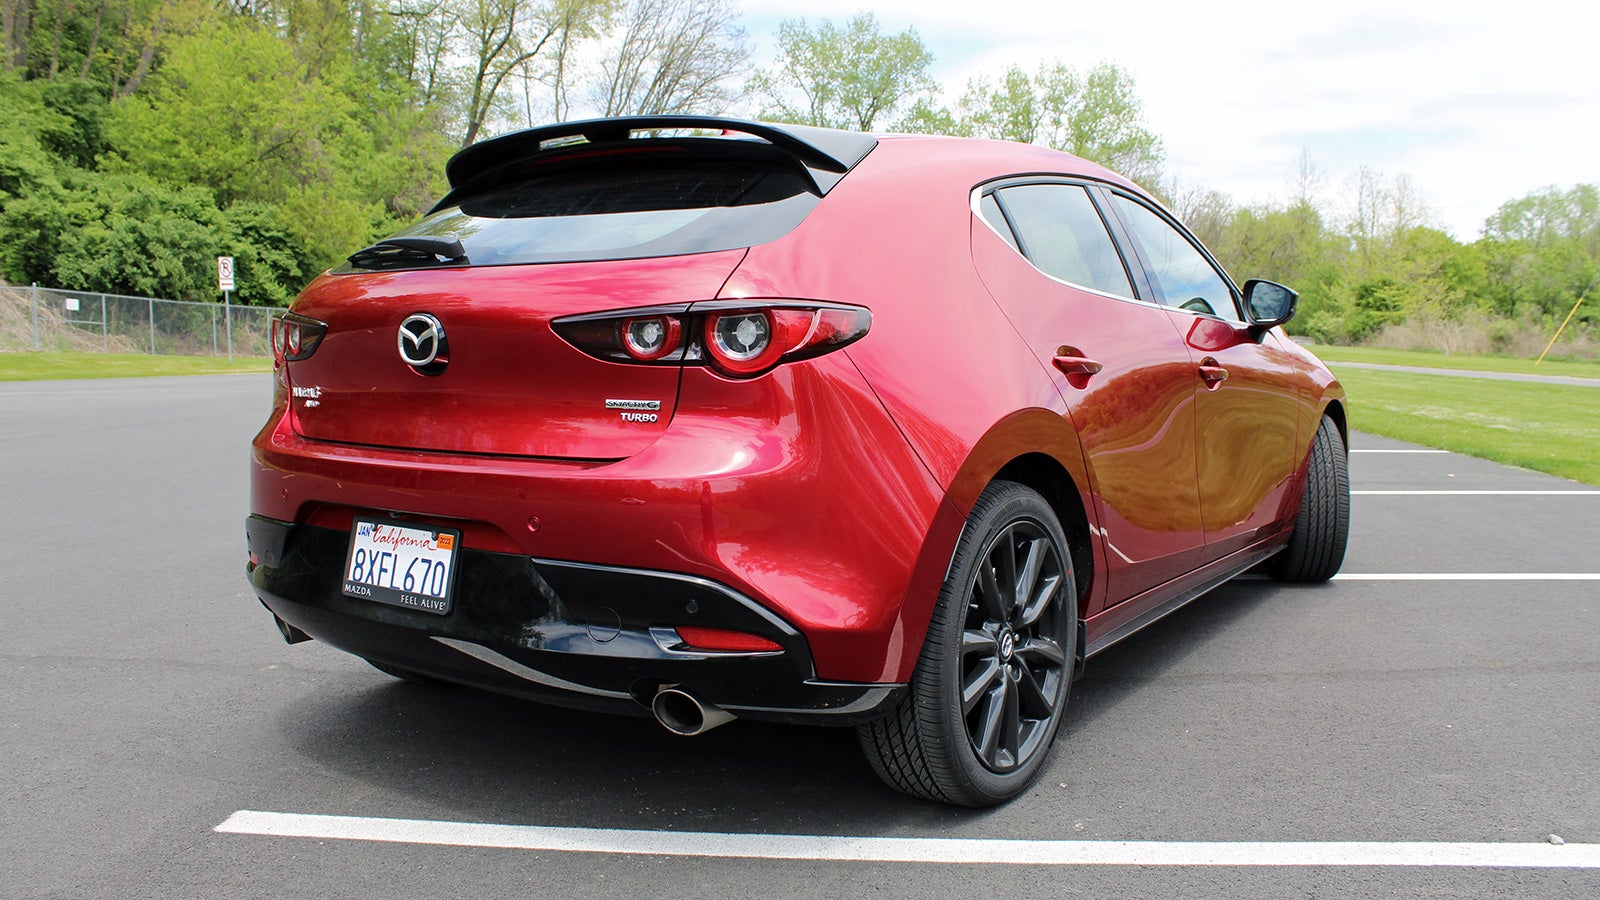 The Mazda3’s Infotainment Dial is Distracting, No Matter What Mazda Says